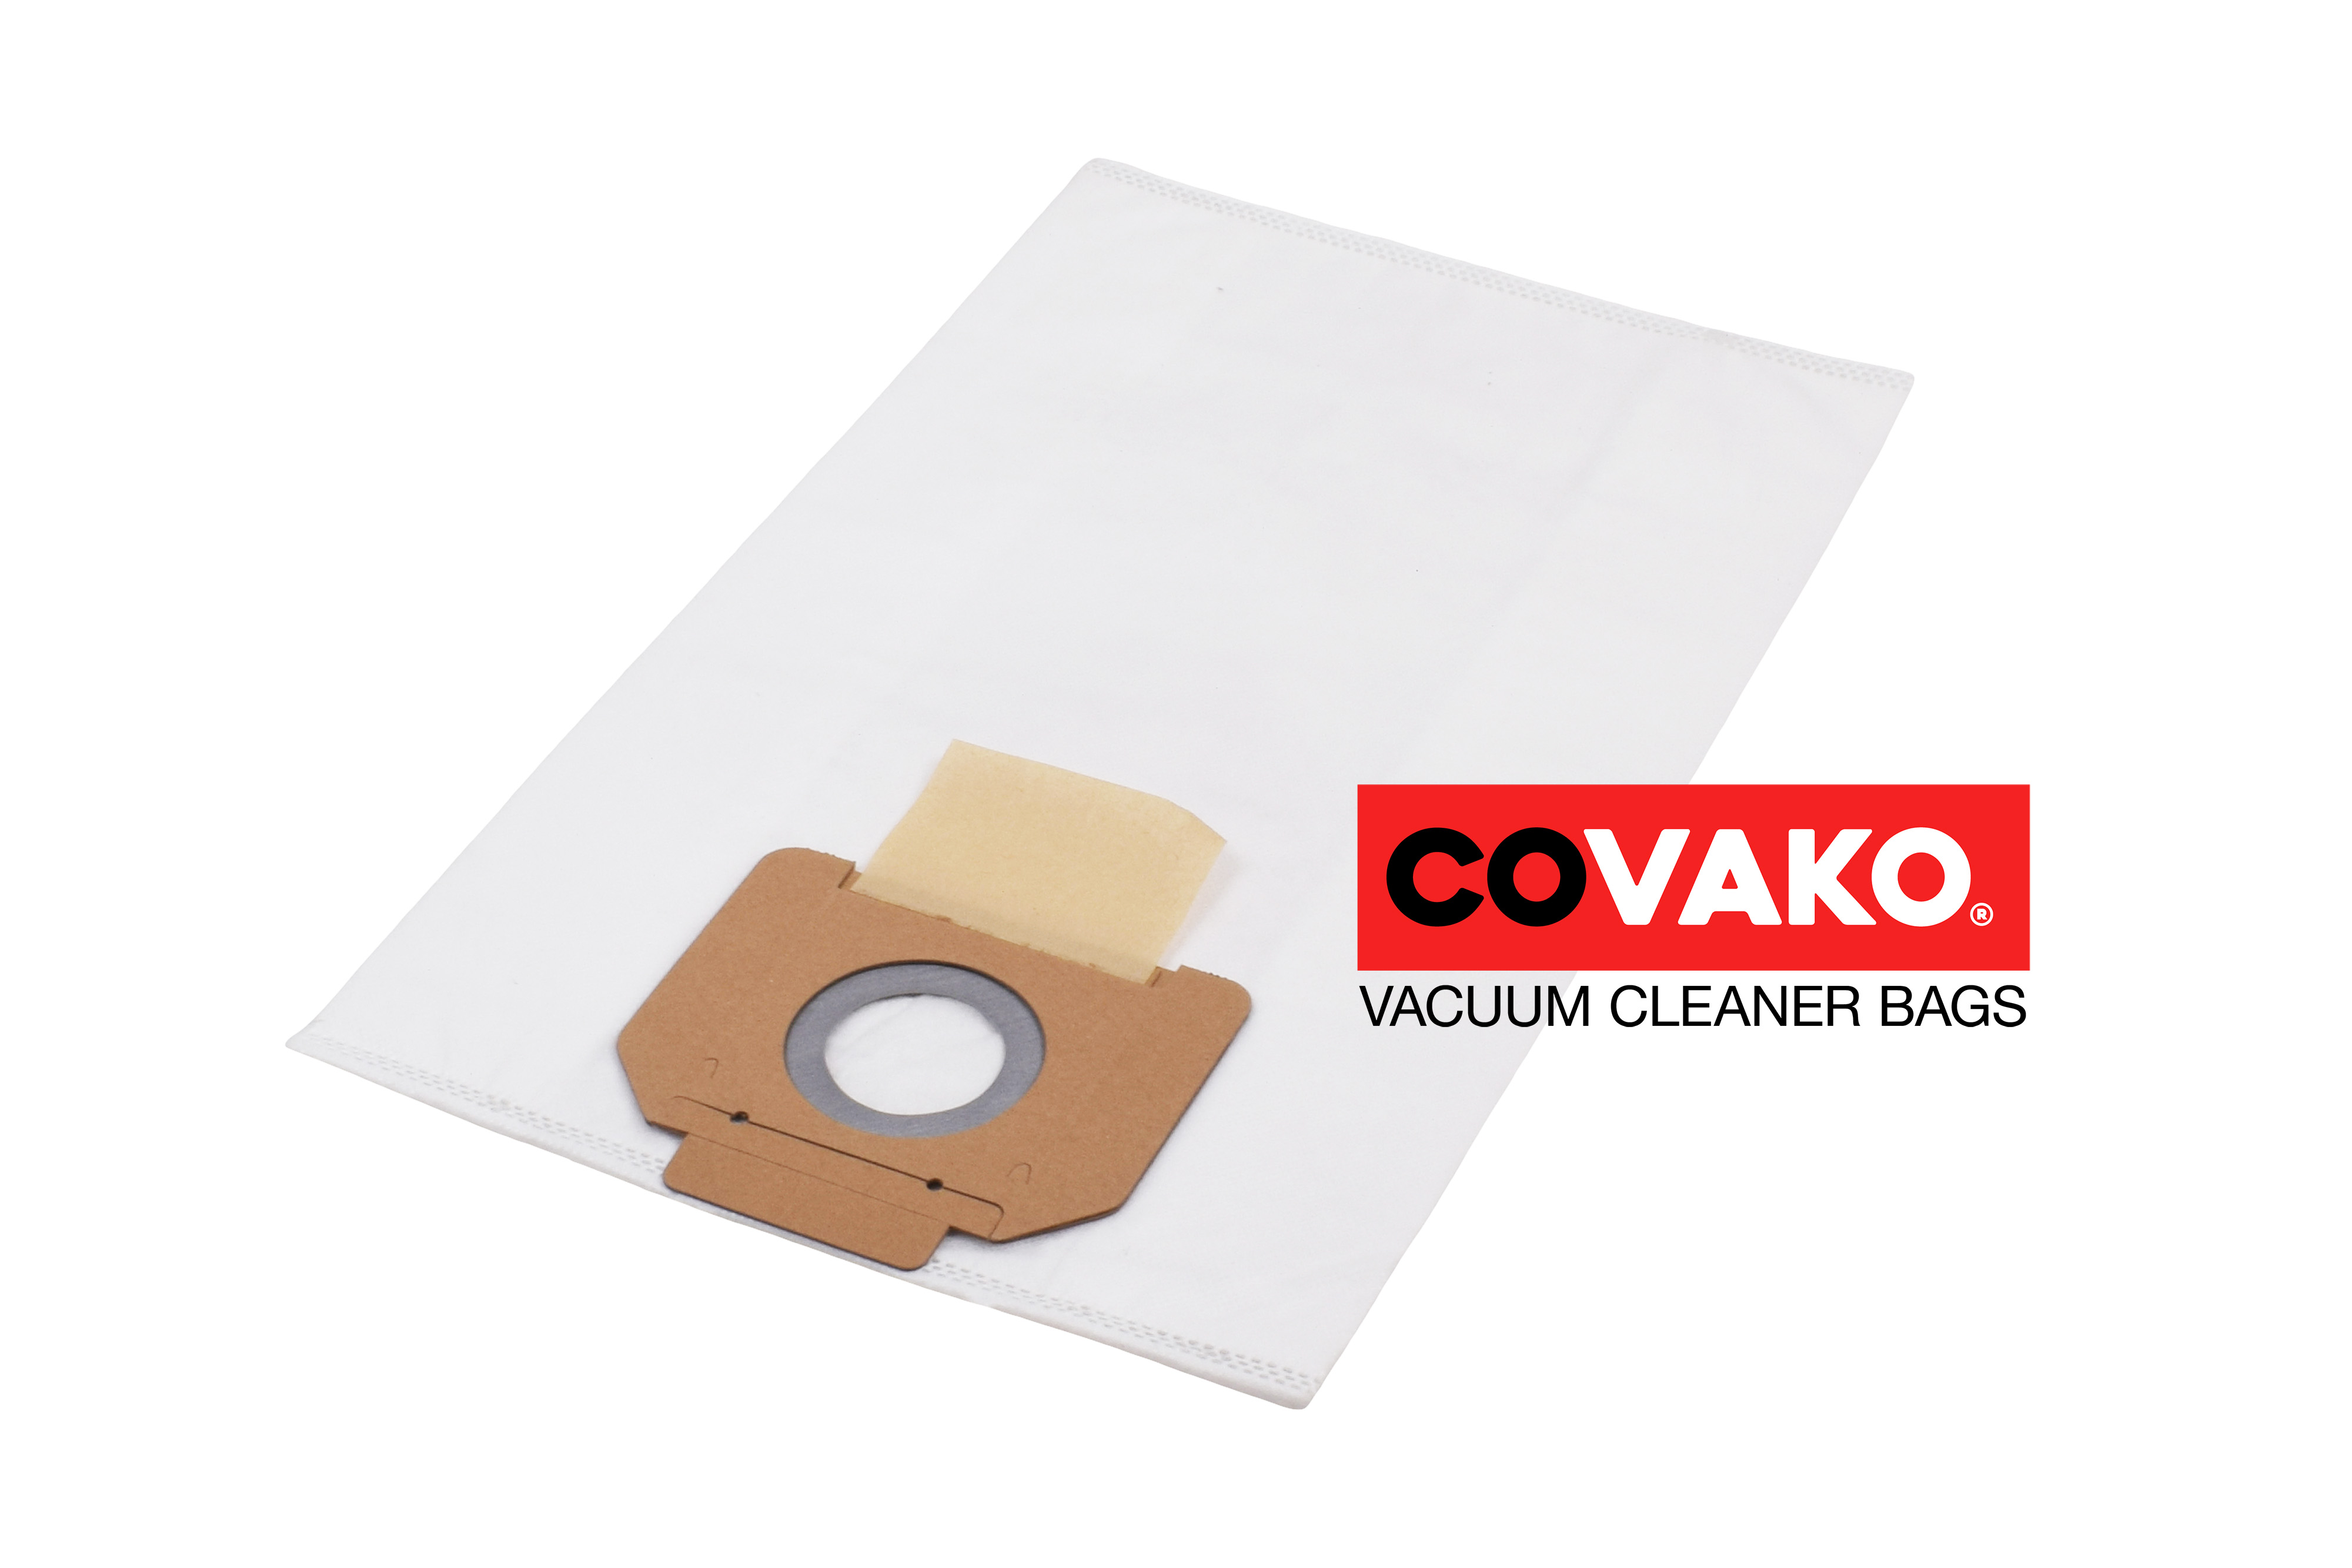 IPC GP 1/16 ECO A / Synthesis - IPC vacuum cleaner bags